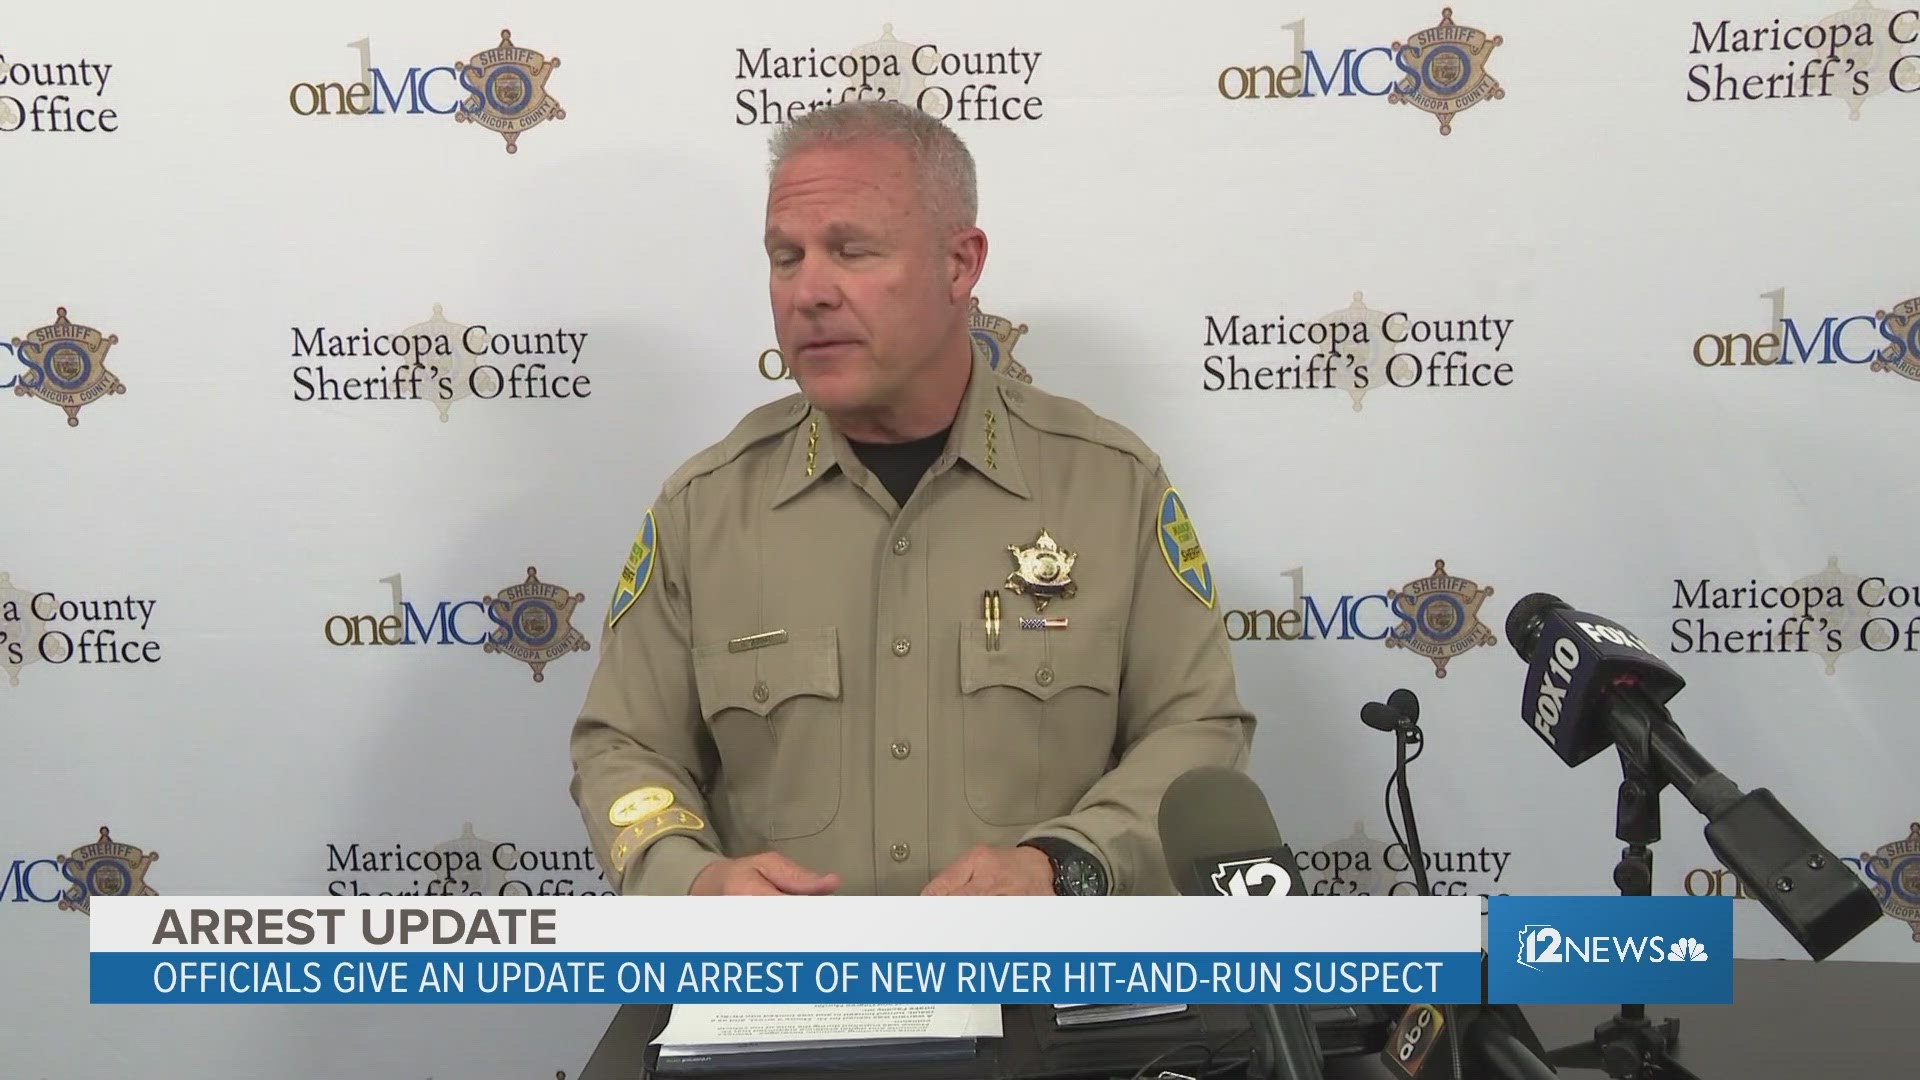 MCSO gives an update on the arrest of a hit-and-run suspect who allegedly killed a jogger with a vehicle belonging to a law enforcement official.